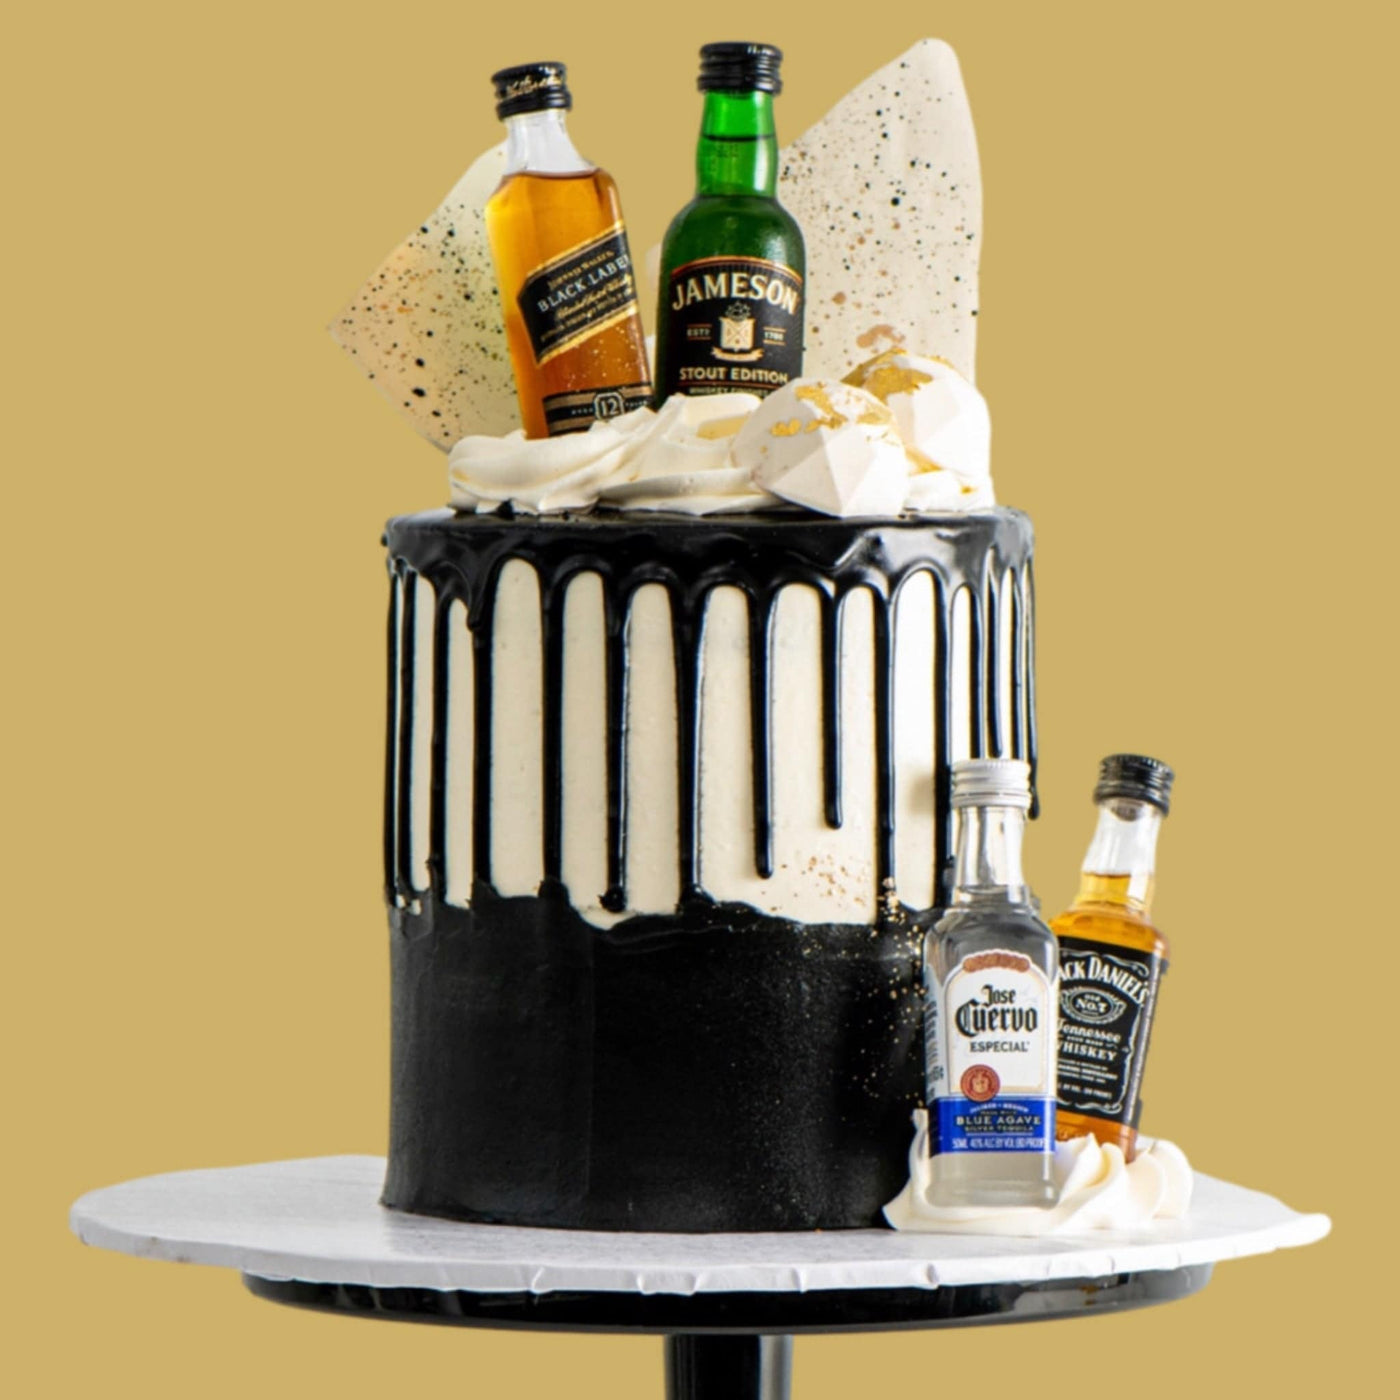 RoMan Cakes - We are showing Alcohol and cigarettes with our Customized  theme cake.🥃🎂 Have you tried this alcoholic cake? Comment below👇 Book  your cake now! . . . Follow 👉@roman_cakes_ Powered